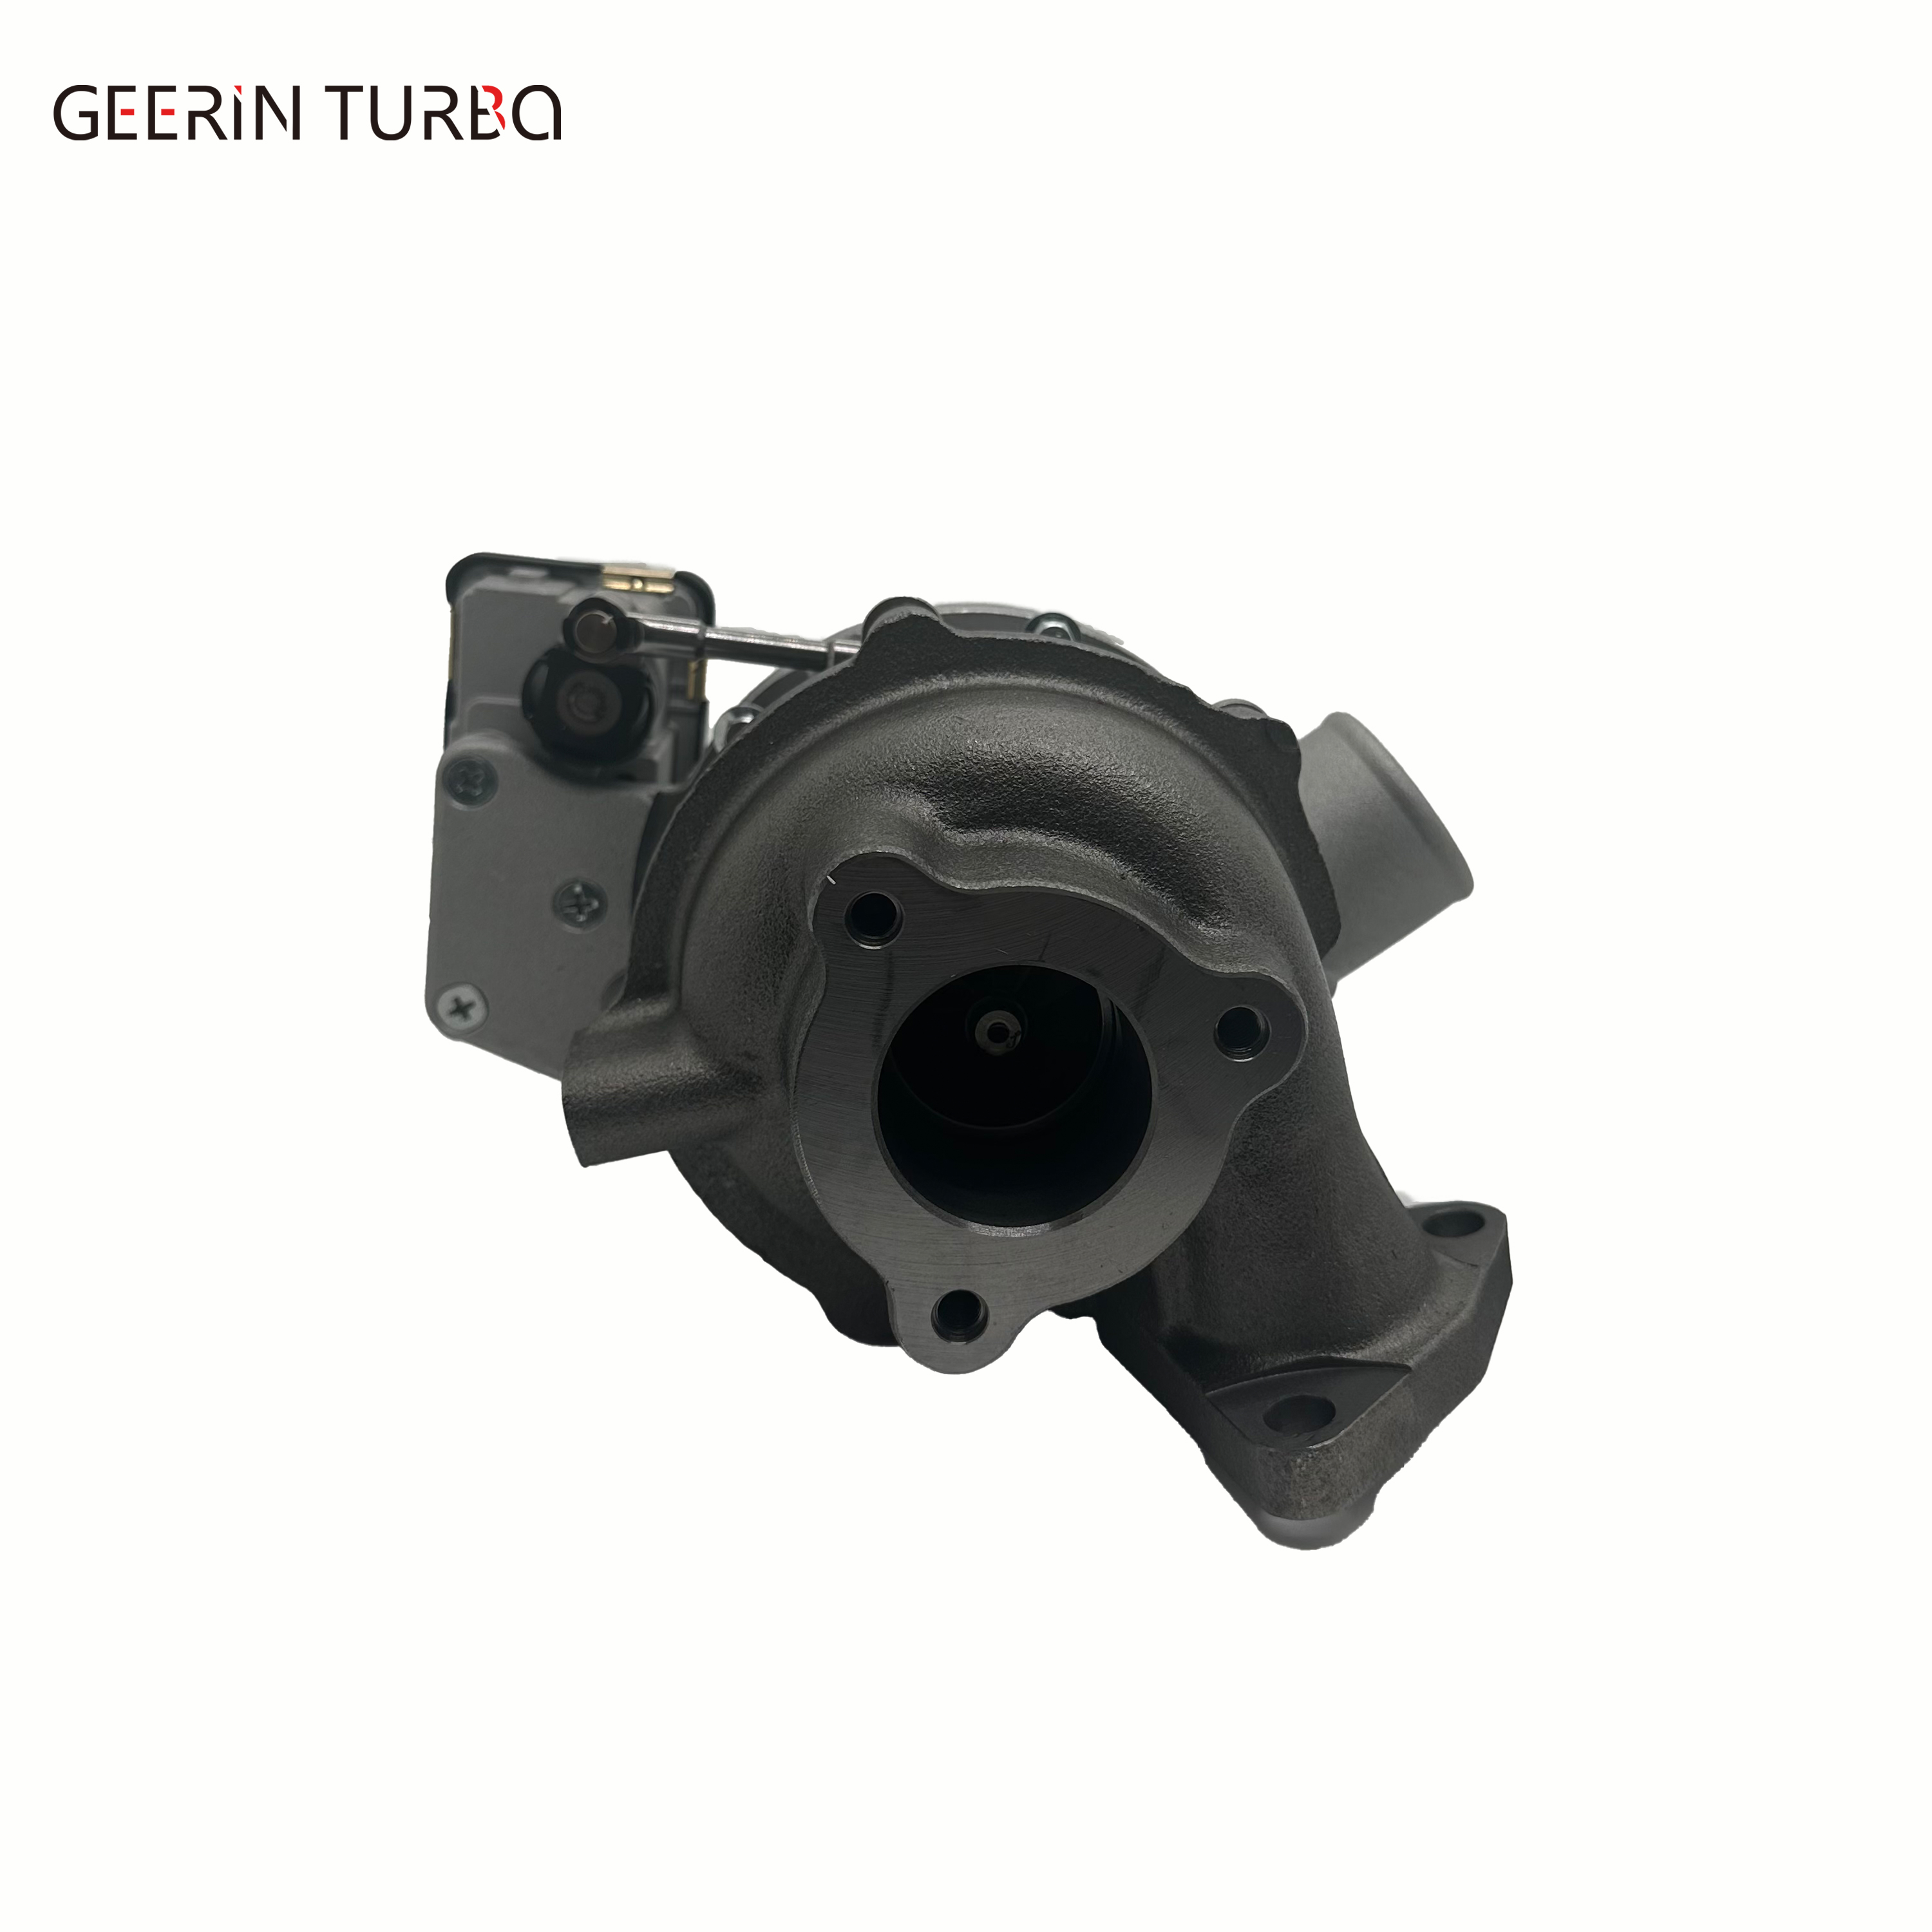 GTC1446VZ 815479-0002 815479- 5002S 815479-5010S GW4D20 1118100XED12 Electric Turbo Charger For Great Wall Haval H6 Factory